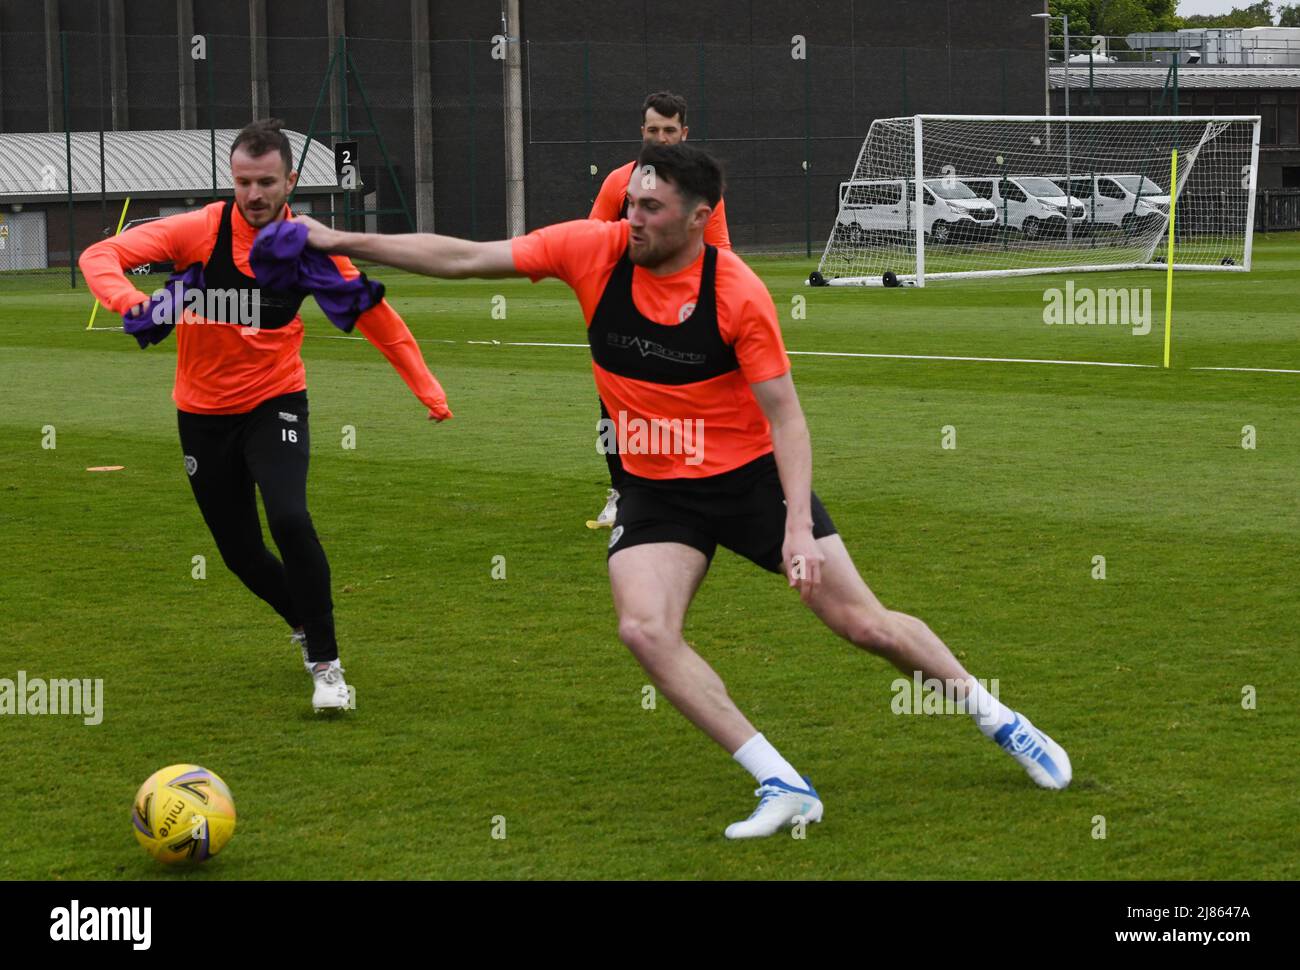 Oriam Sports Centre Edinburgh.Scotland.UK.13th May 22 Hearts Training session for Cinch Premiership vs Rangers . Hearts' Andy Halliday & John Souttar during training session . Credit: eric mccowat/Alamy Live News Stock Photo